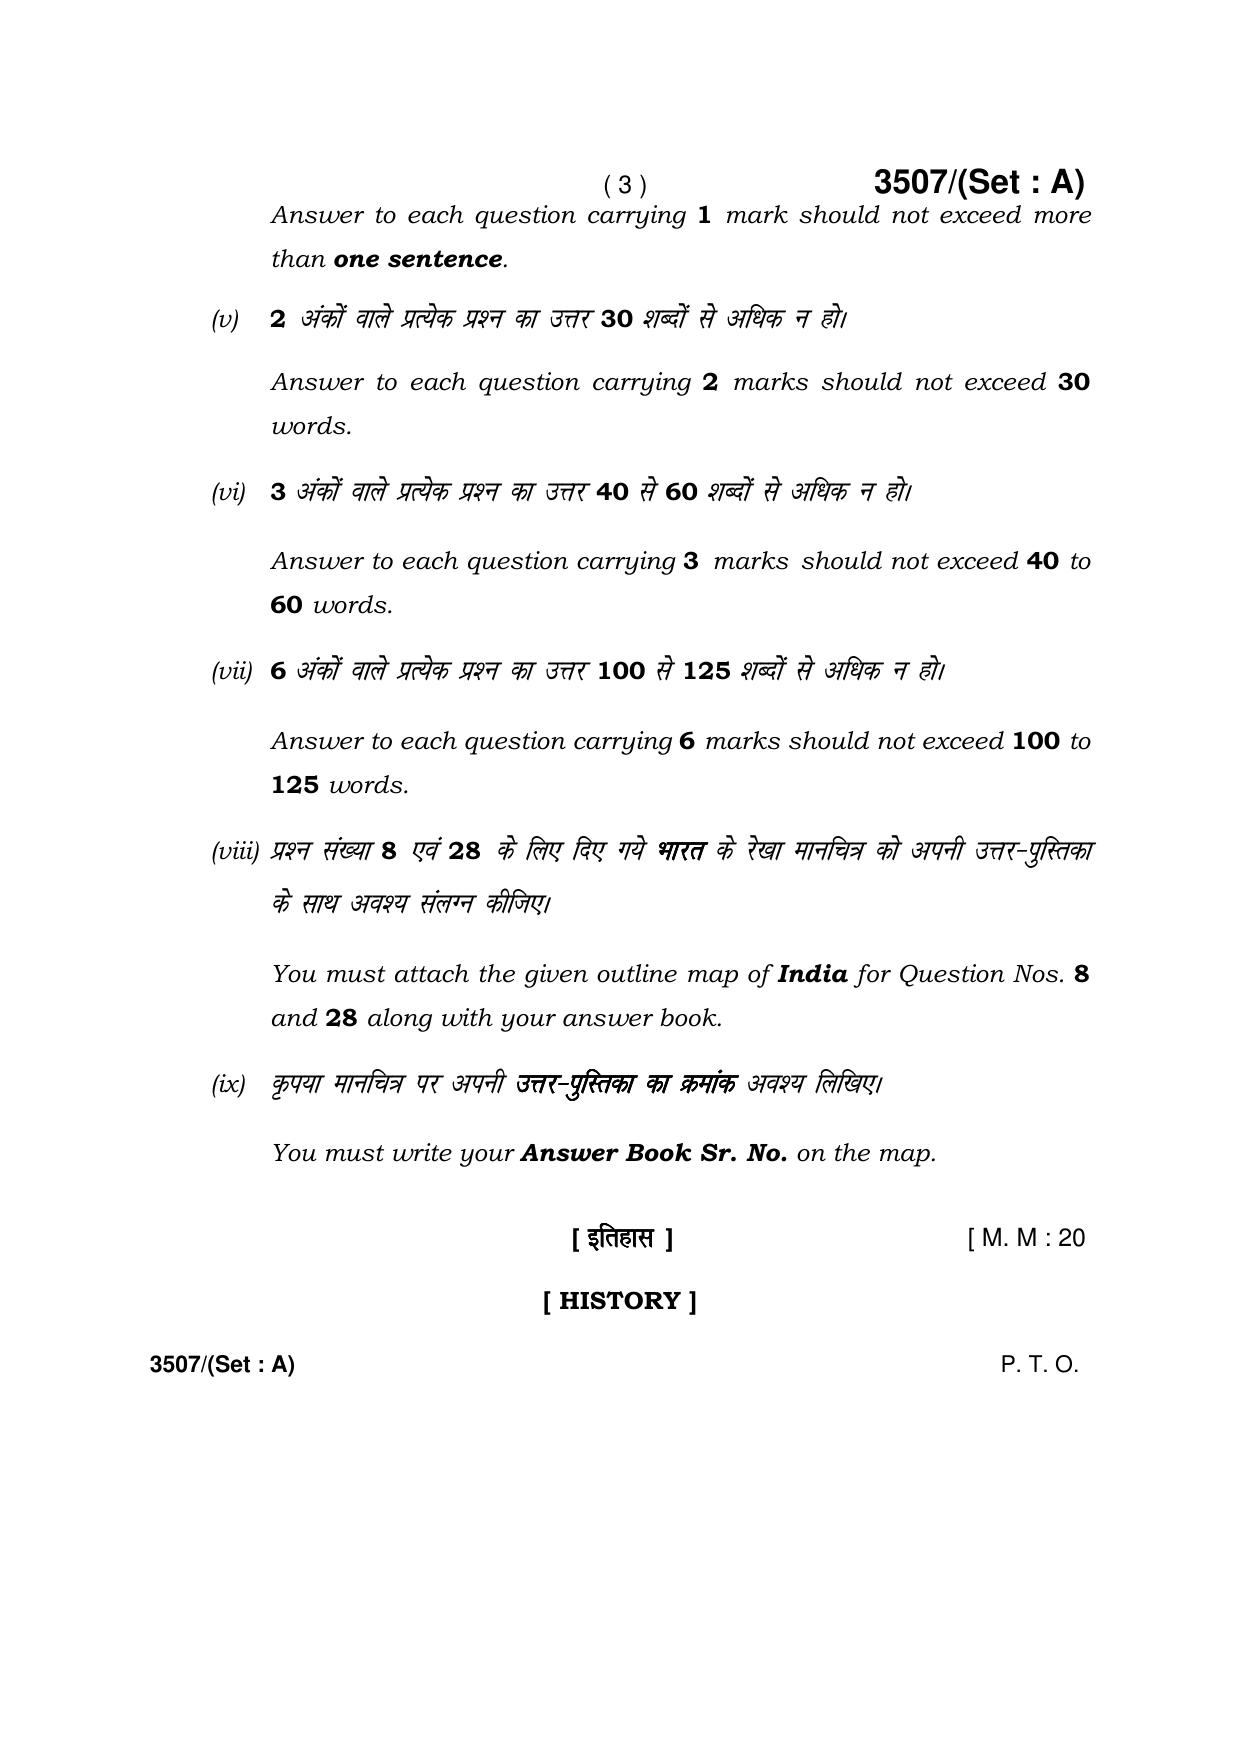 Haryana Board HBSE Class 10 Social Science -A 2018 Question Paper - Page 3